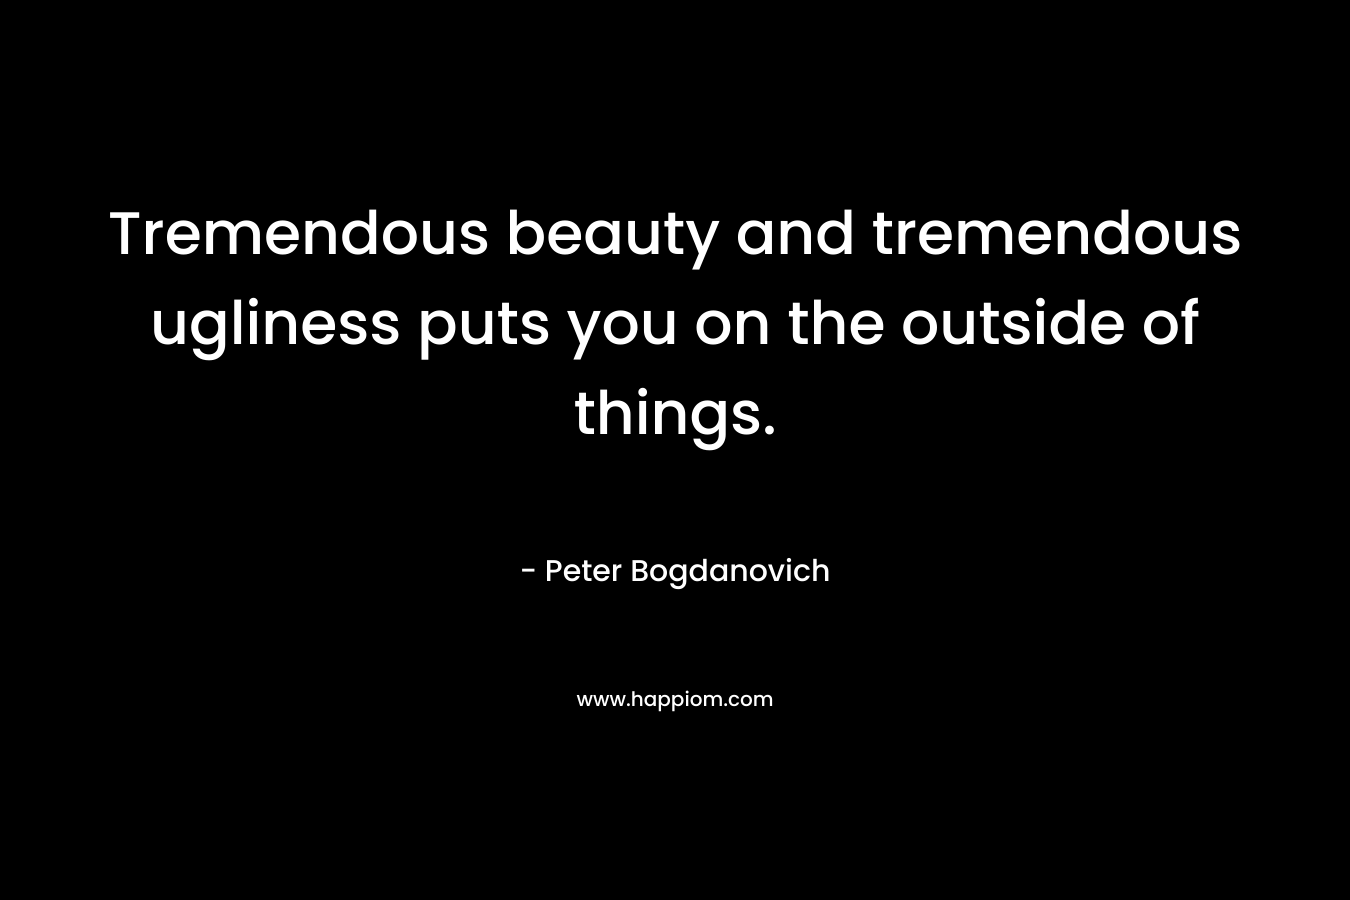 Tremendous beauty and tremendous ugliness puts you on the outside of things. – Peter Bogdanovich